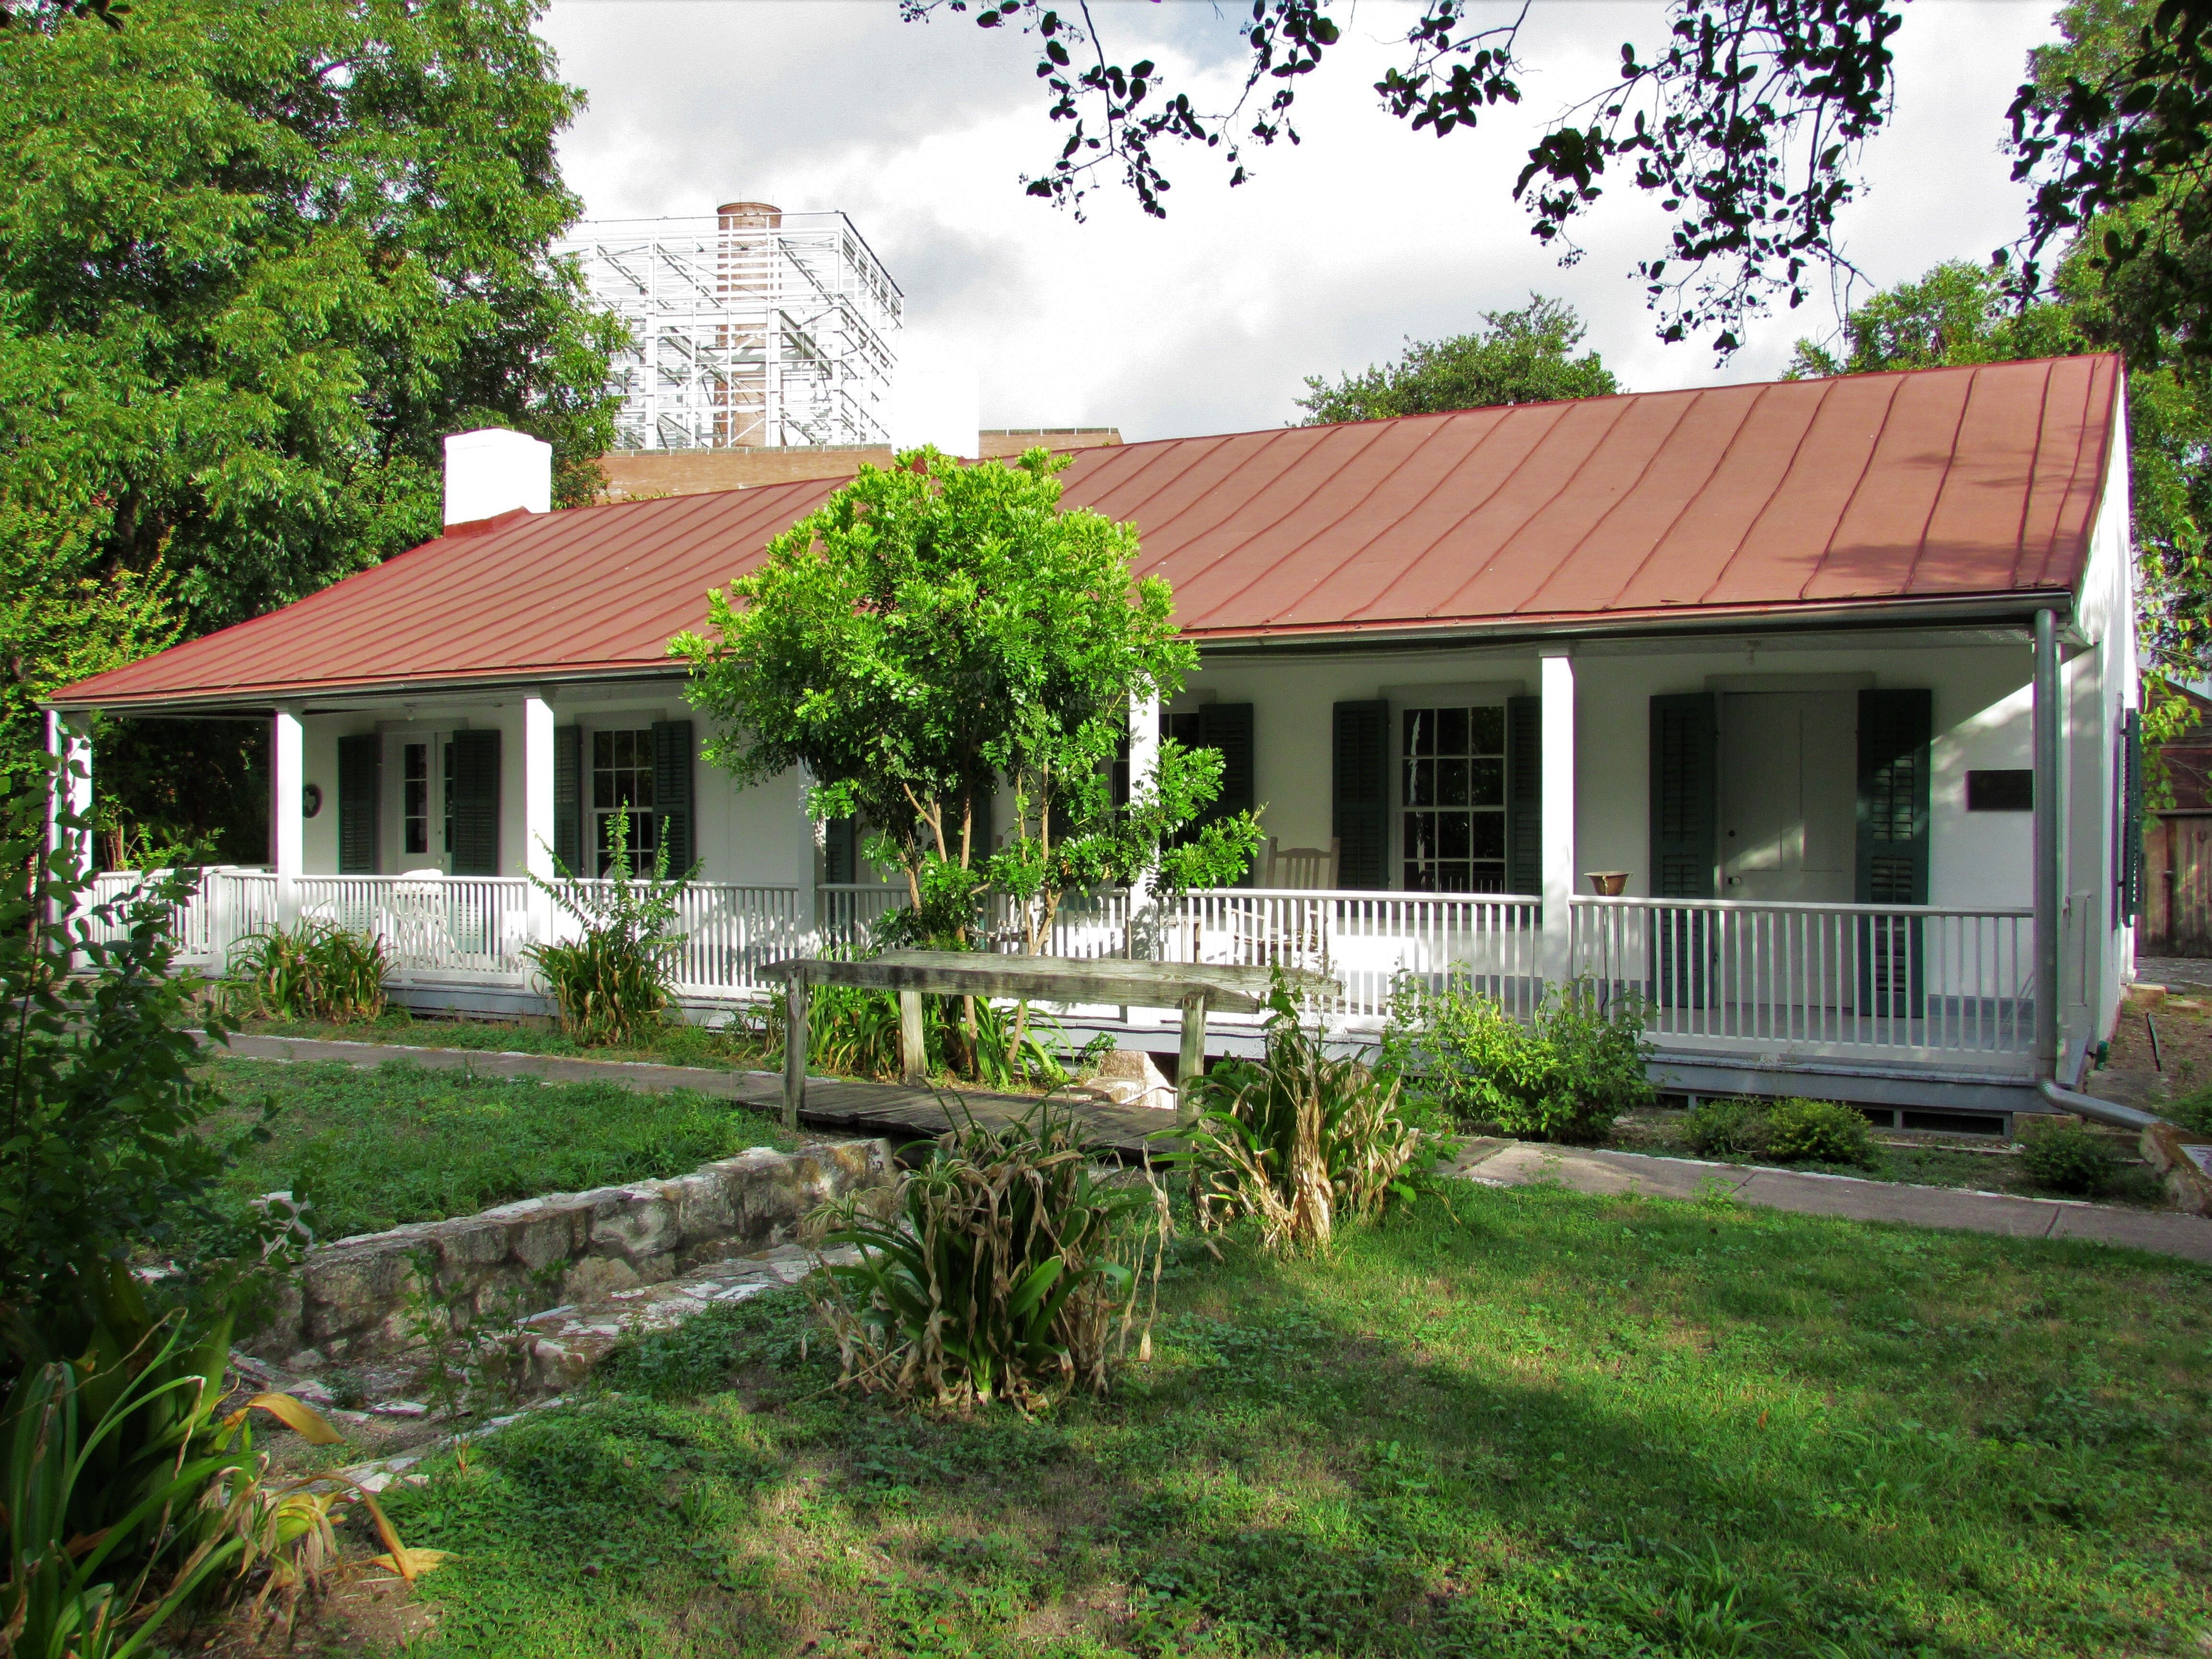 Exterior of the Yturri-Edmunds House Museum. The San Antonio Conservation Society Fnd. is the recipient of a grant from the Texas Historical Foundation supporting preservation efforts at the 1860 House.